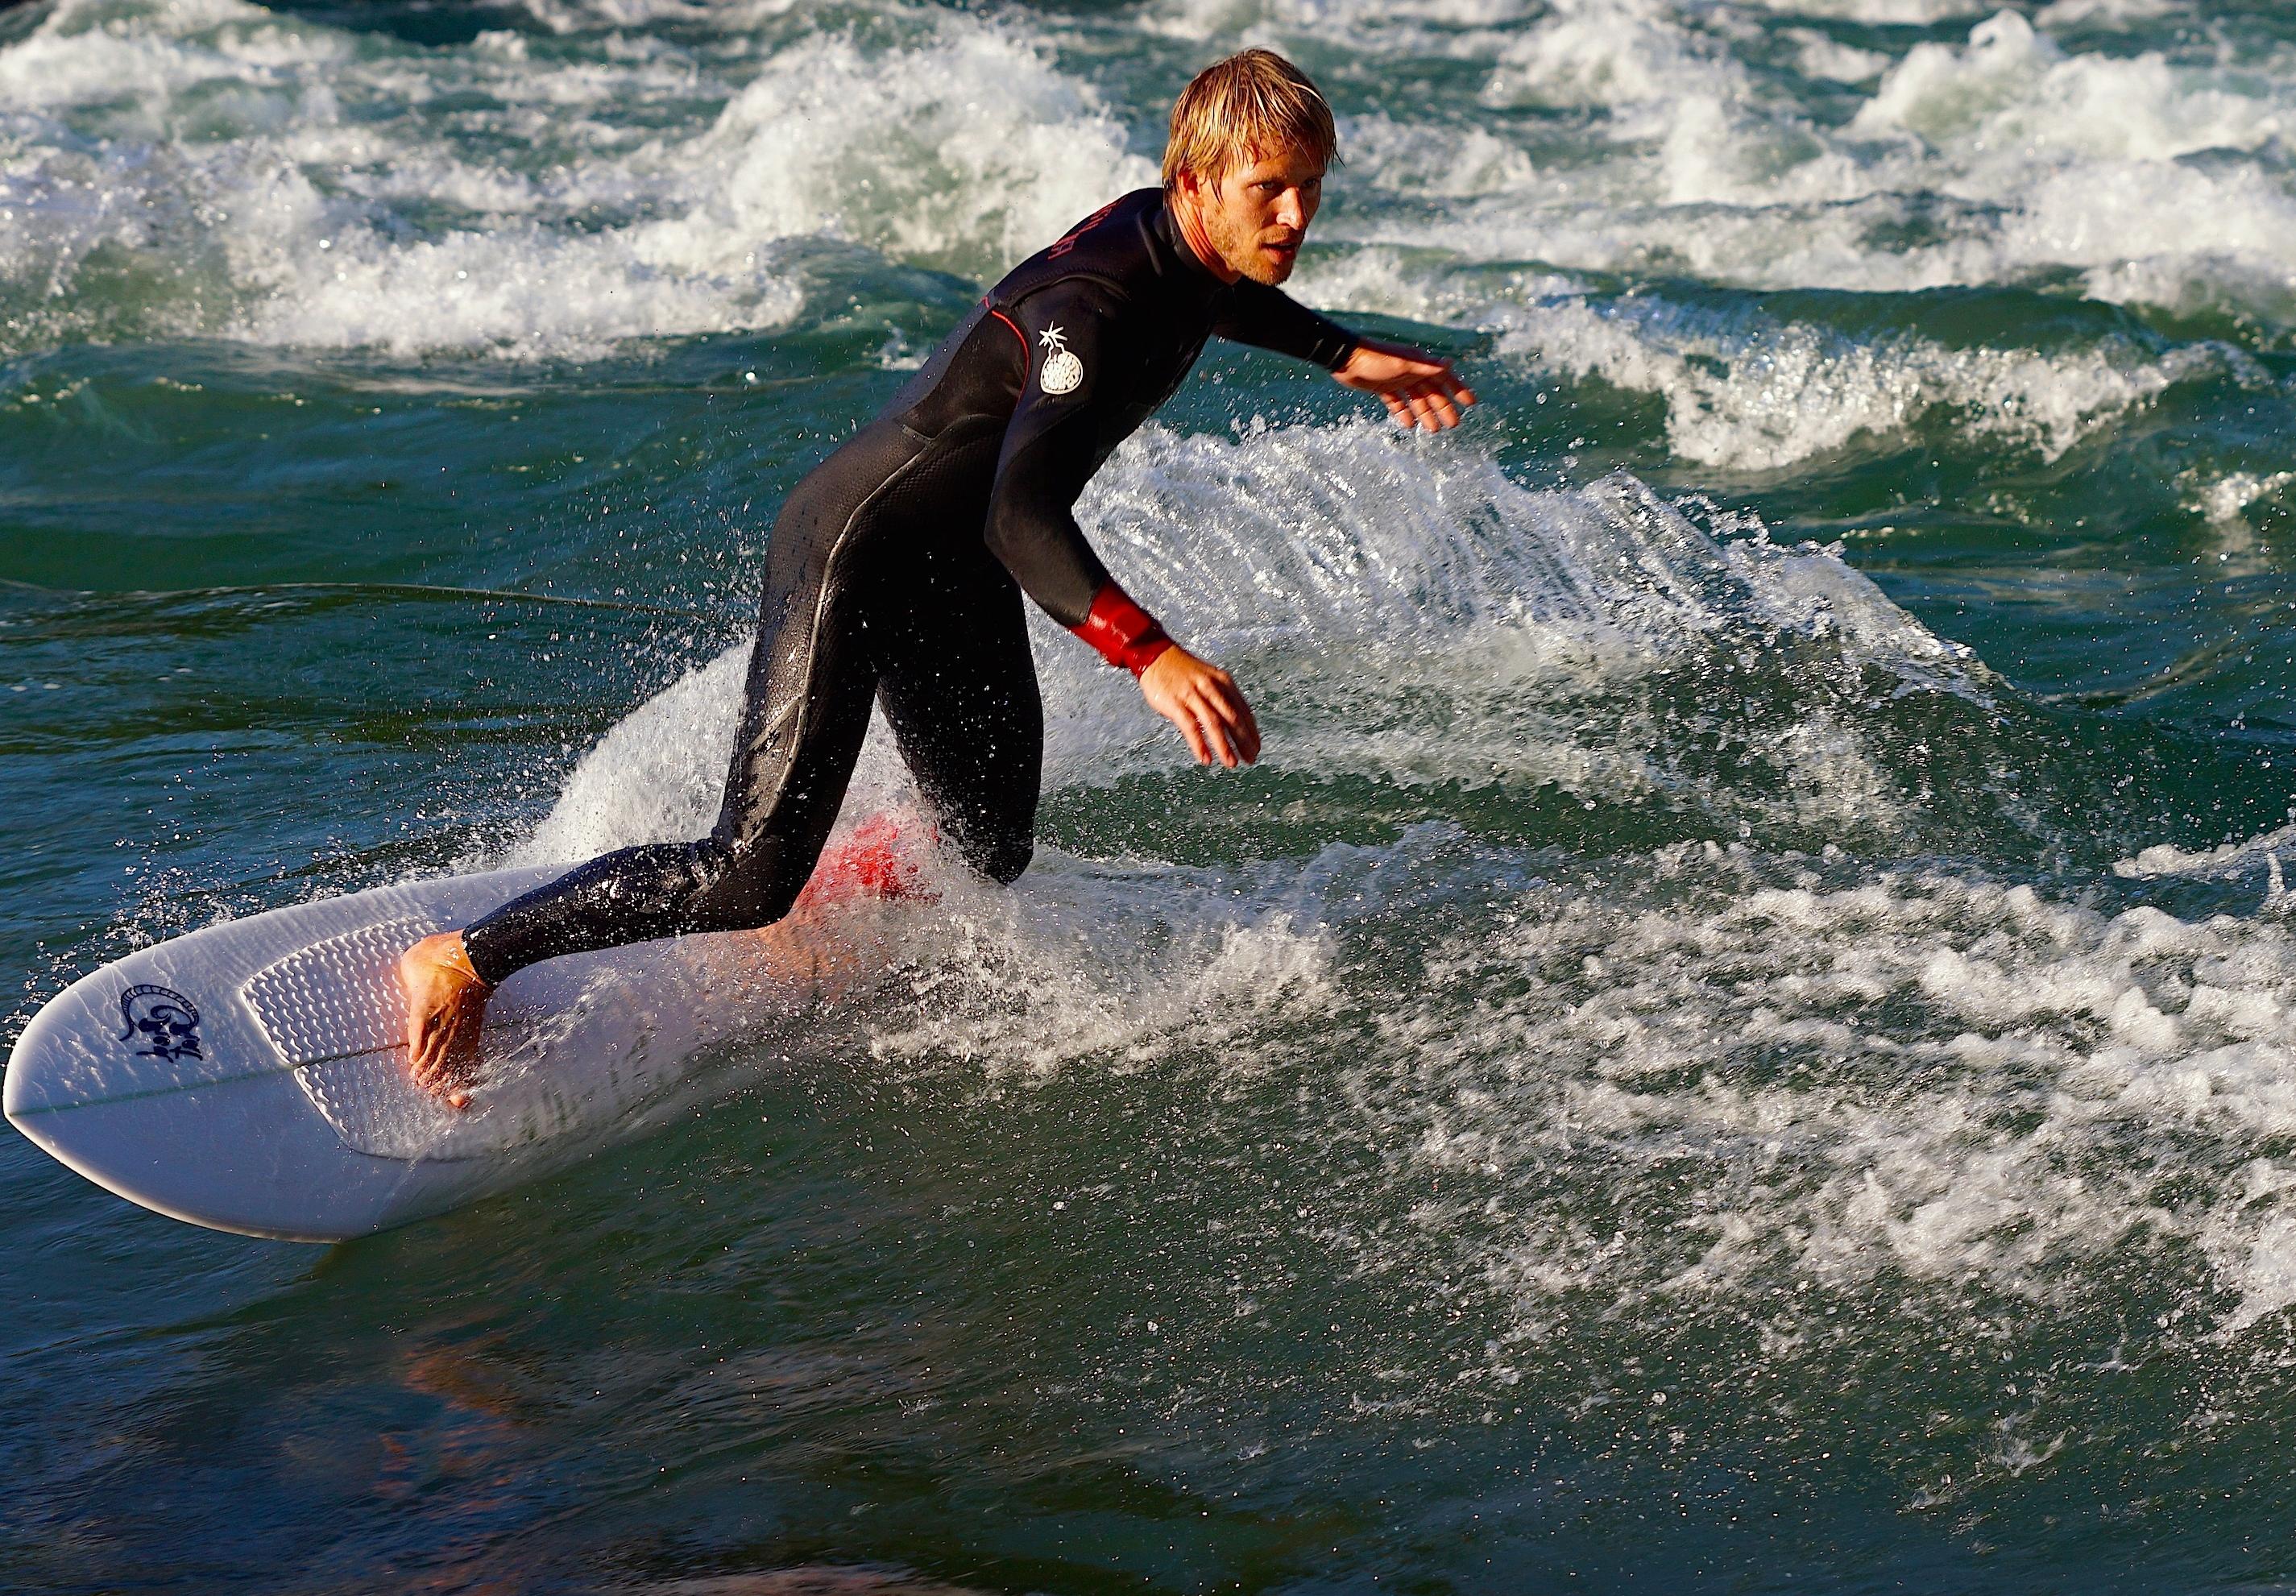 Free picture: water, sport, man, surfing, extreme, beach, sea, ocean